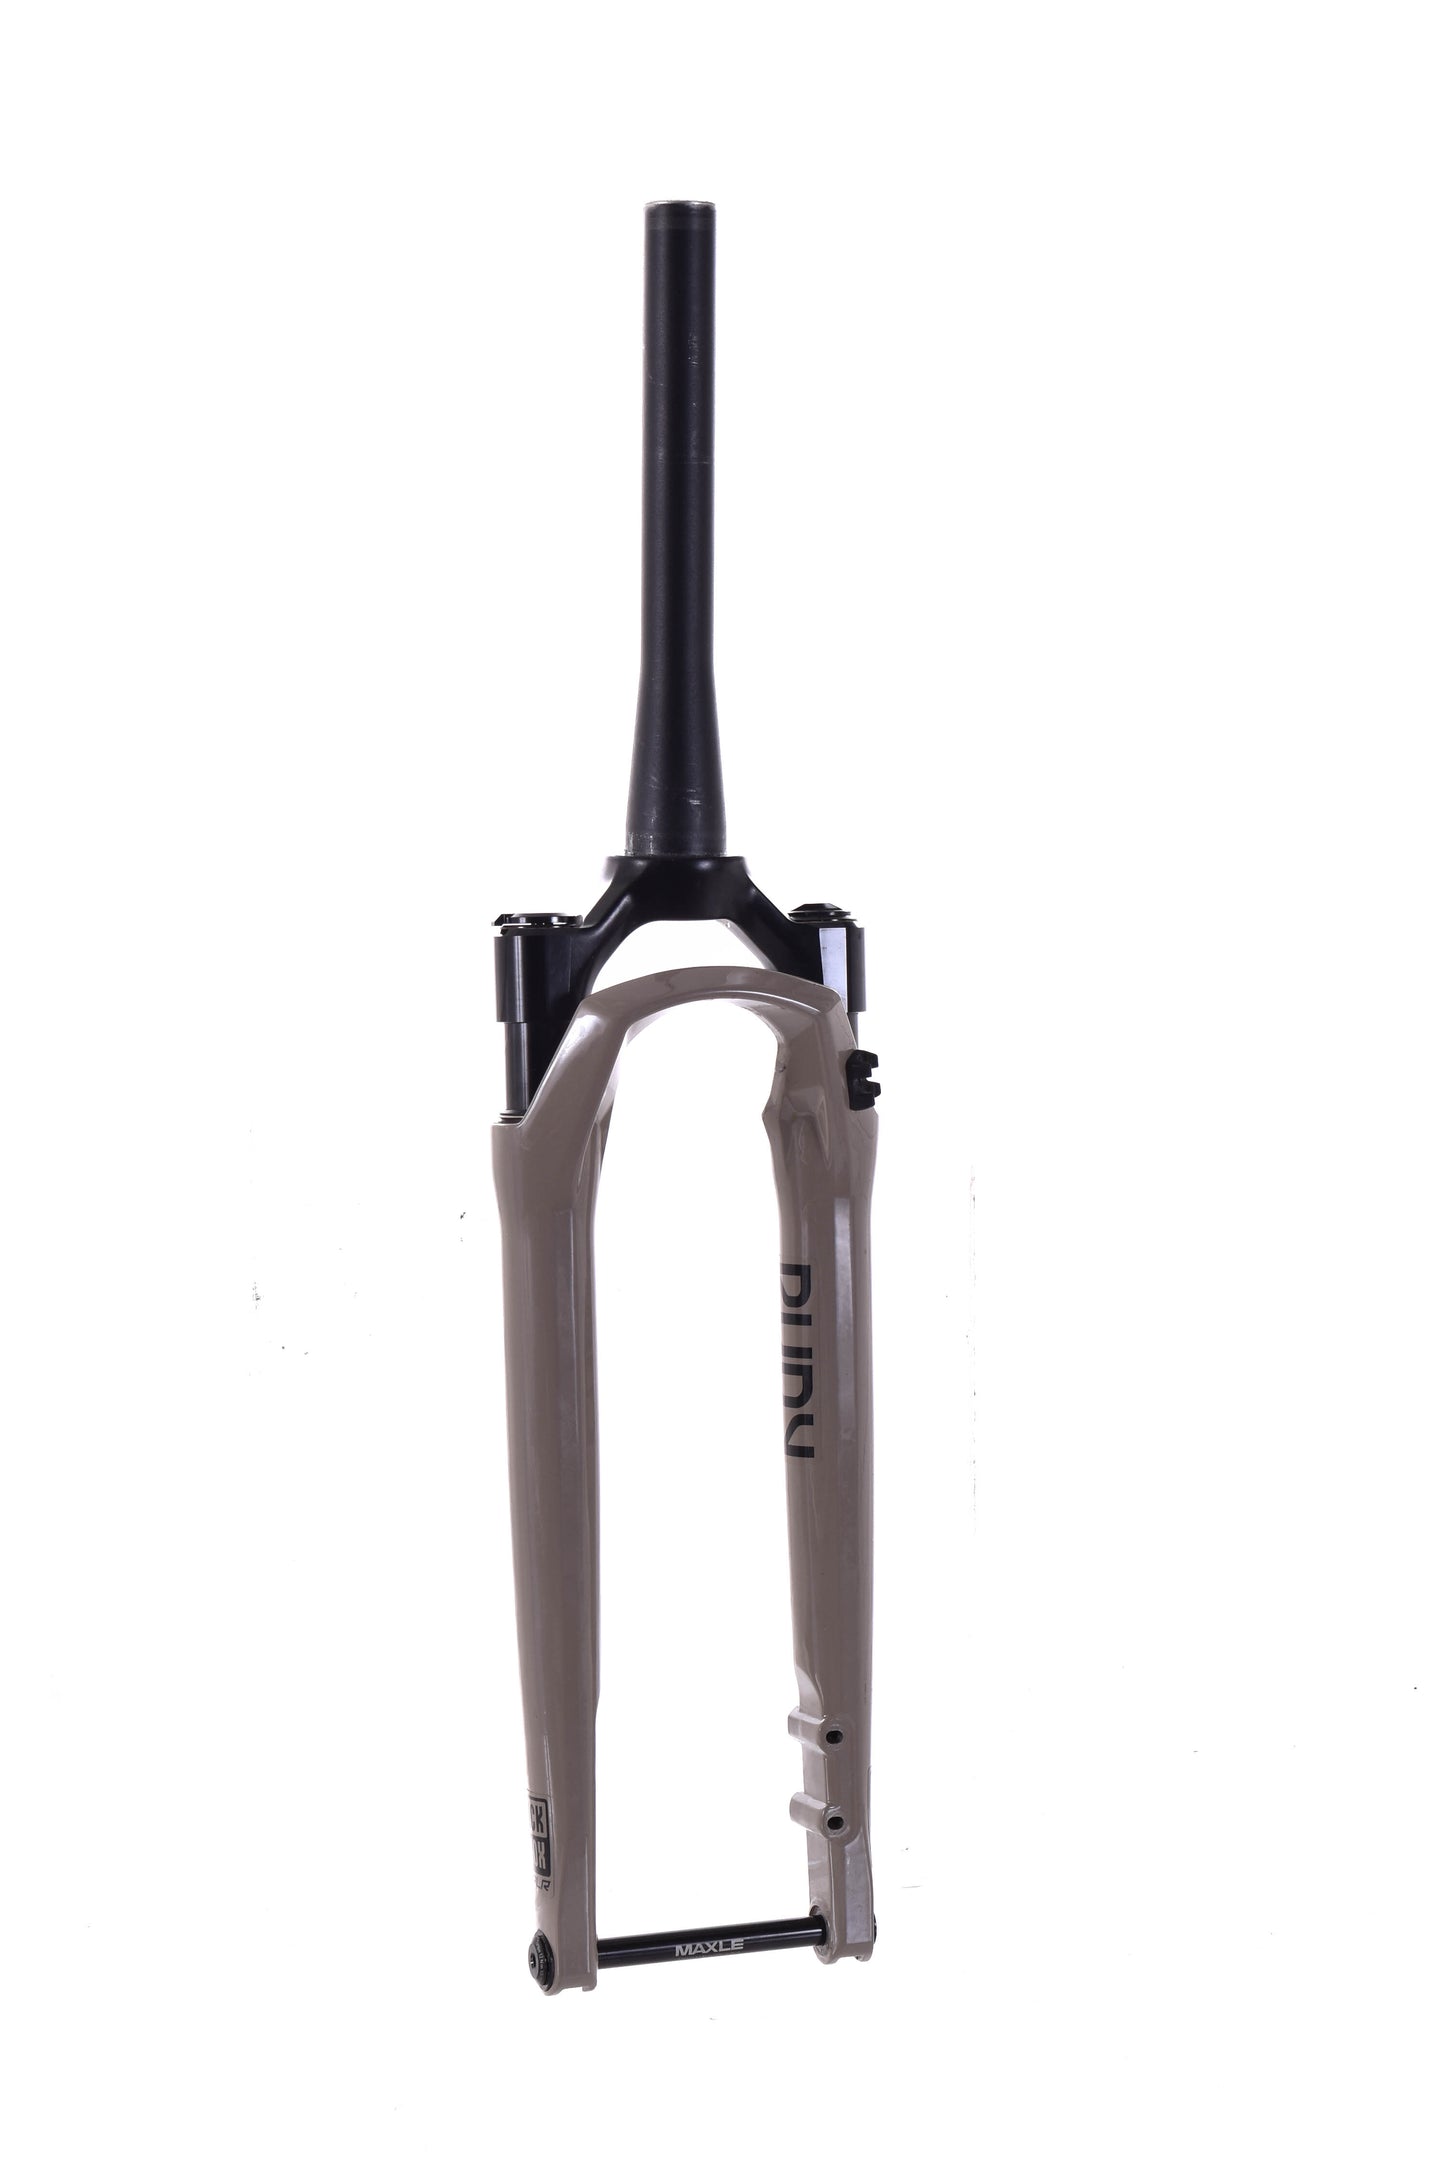 USED RockShox Rudy  Ultimate Suspension Fork 30mm Travel 700c 1-1/8" Tapered